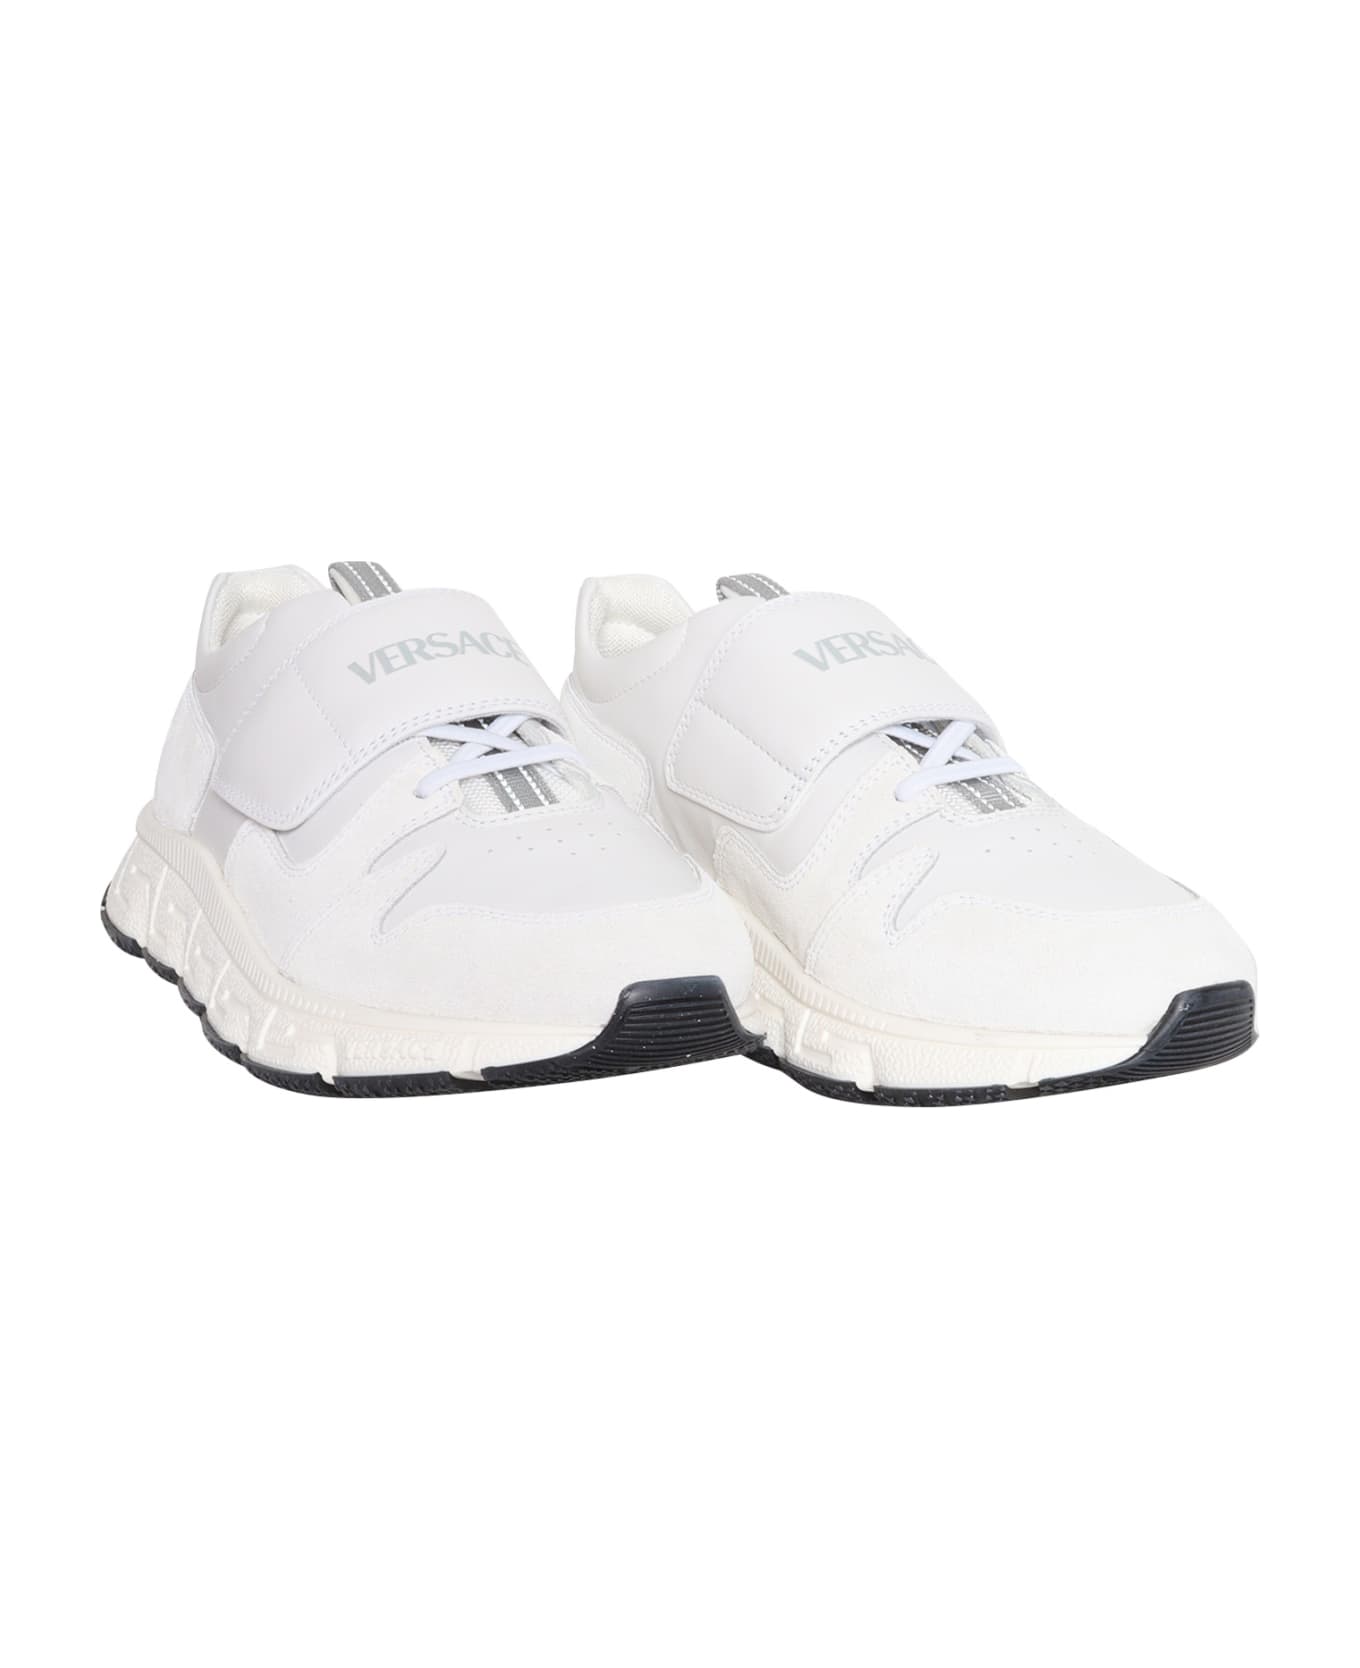 Versace White Leather Sneakers - WHITE